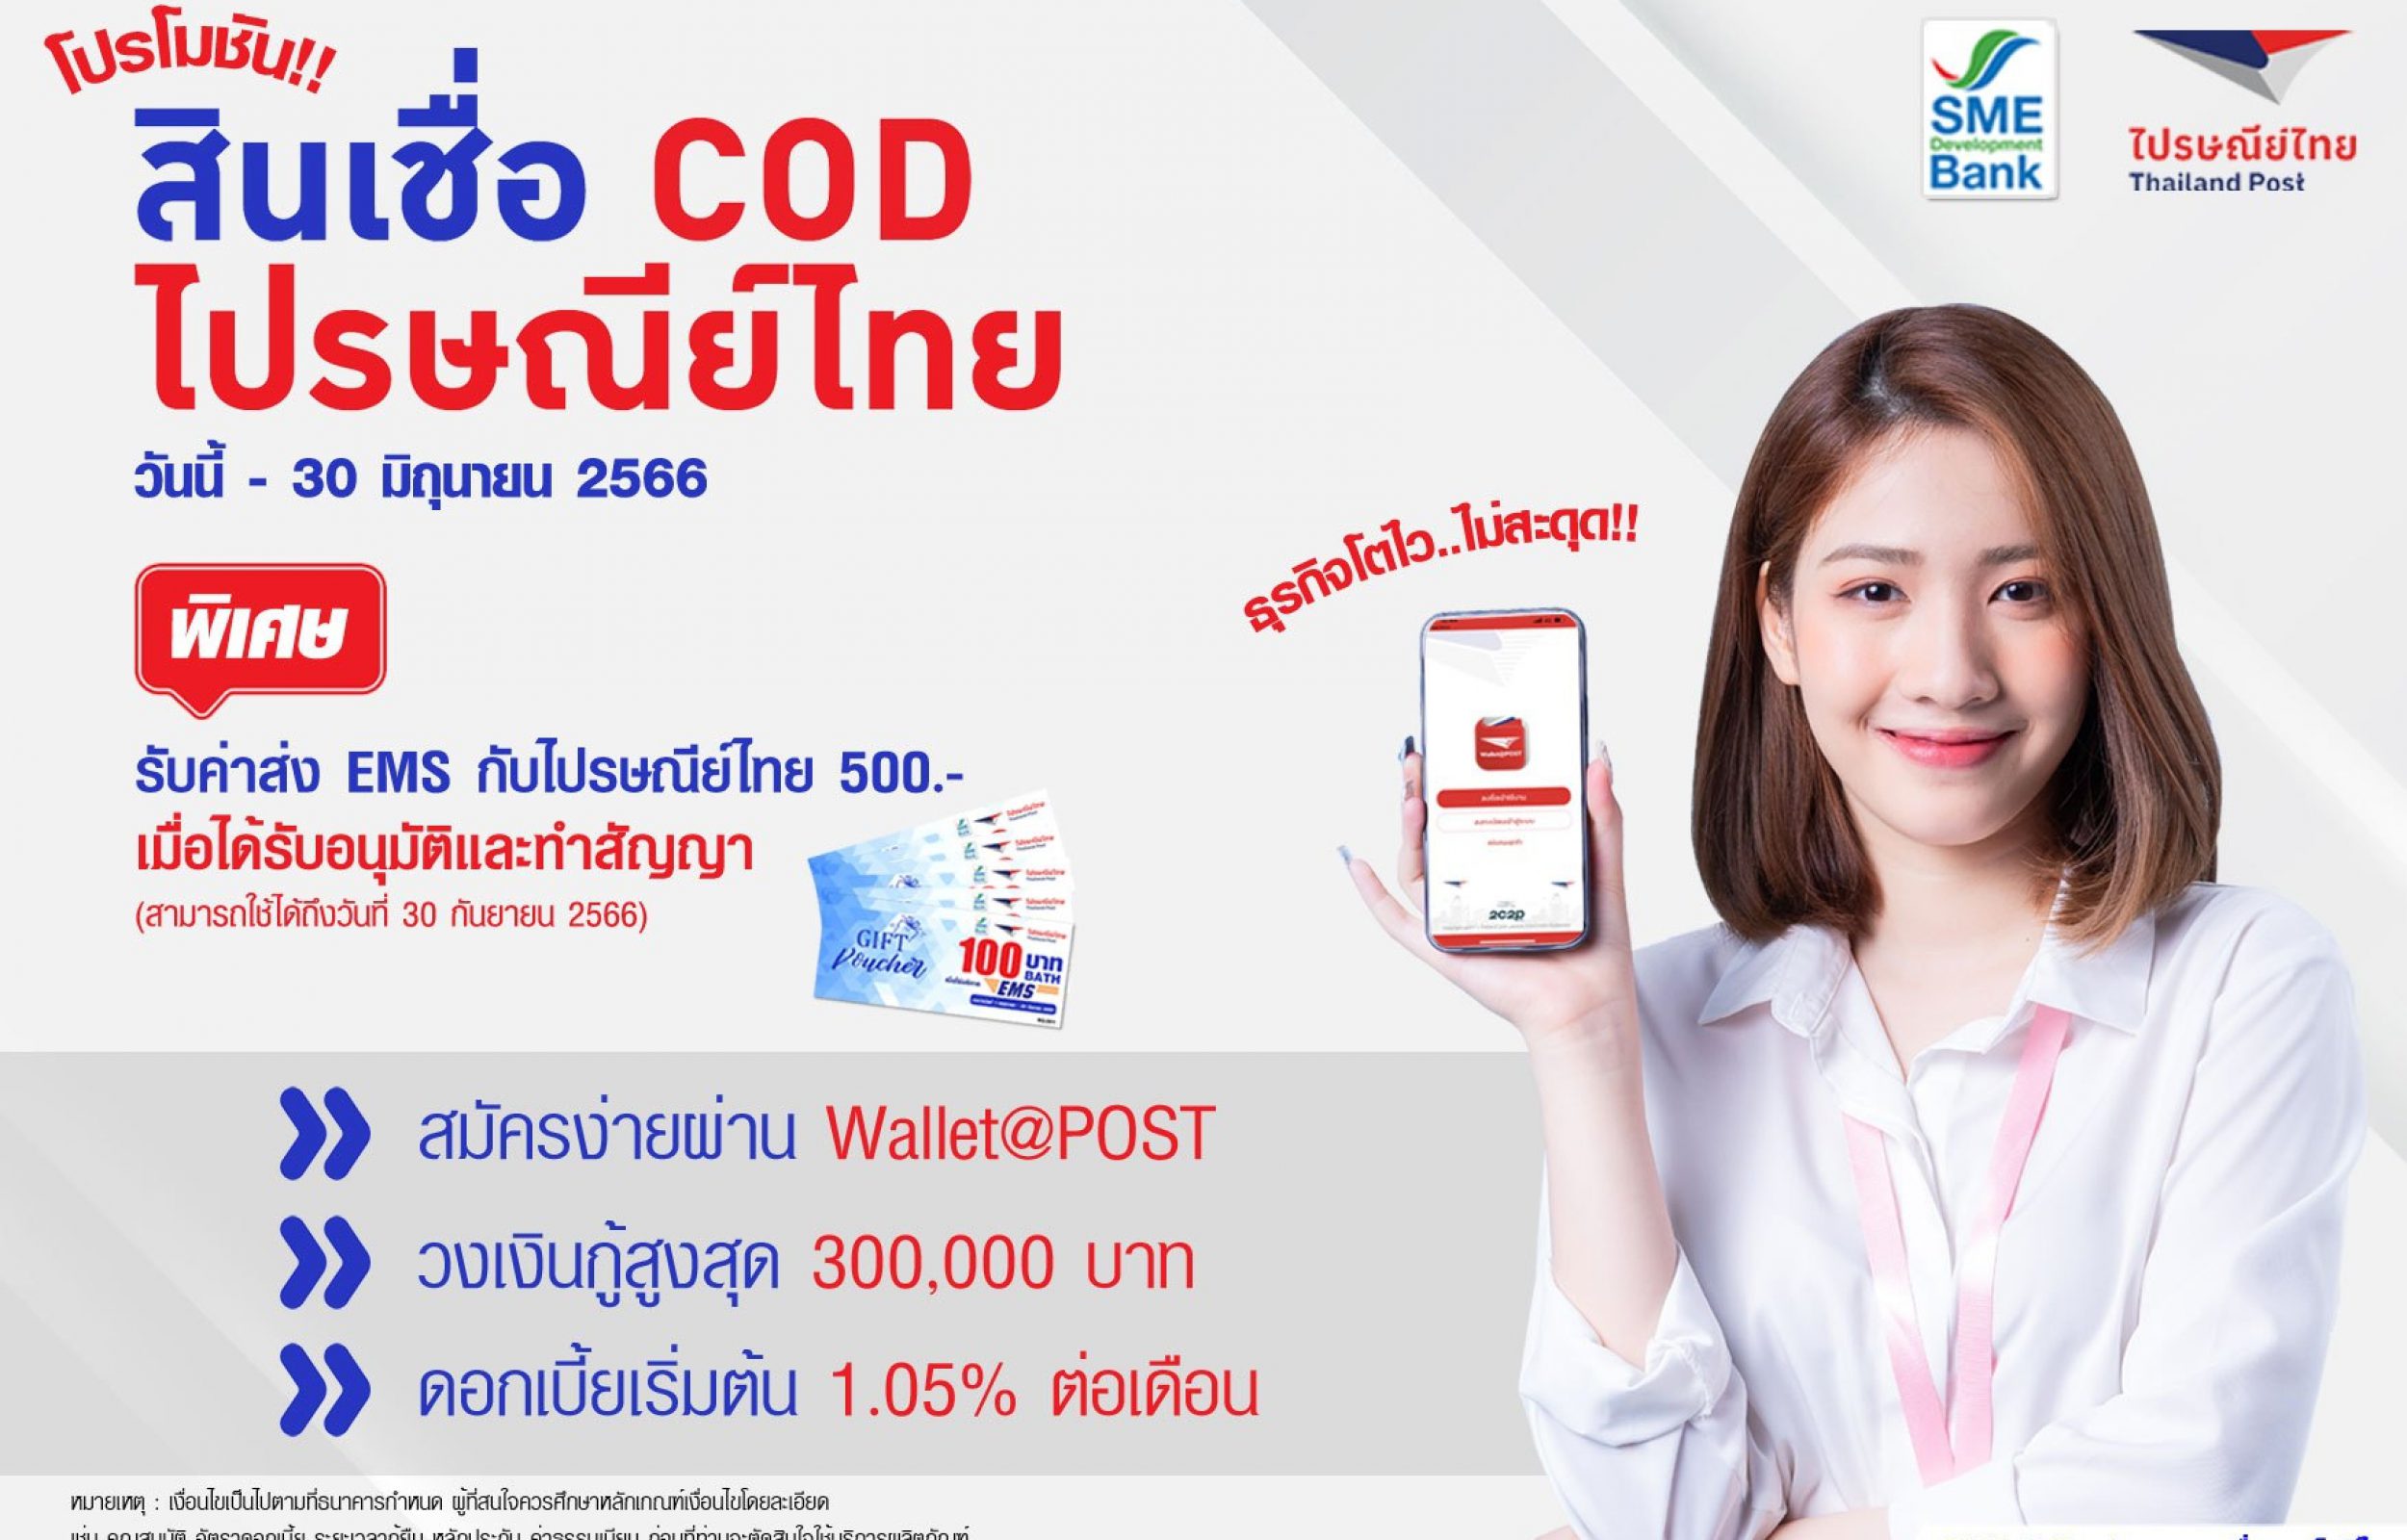 COD Loans Thailand Post, Easy Loan, Get Money Instantly